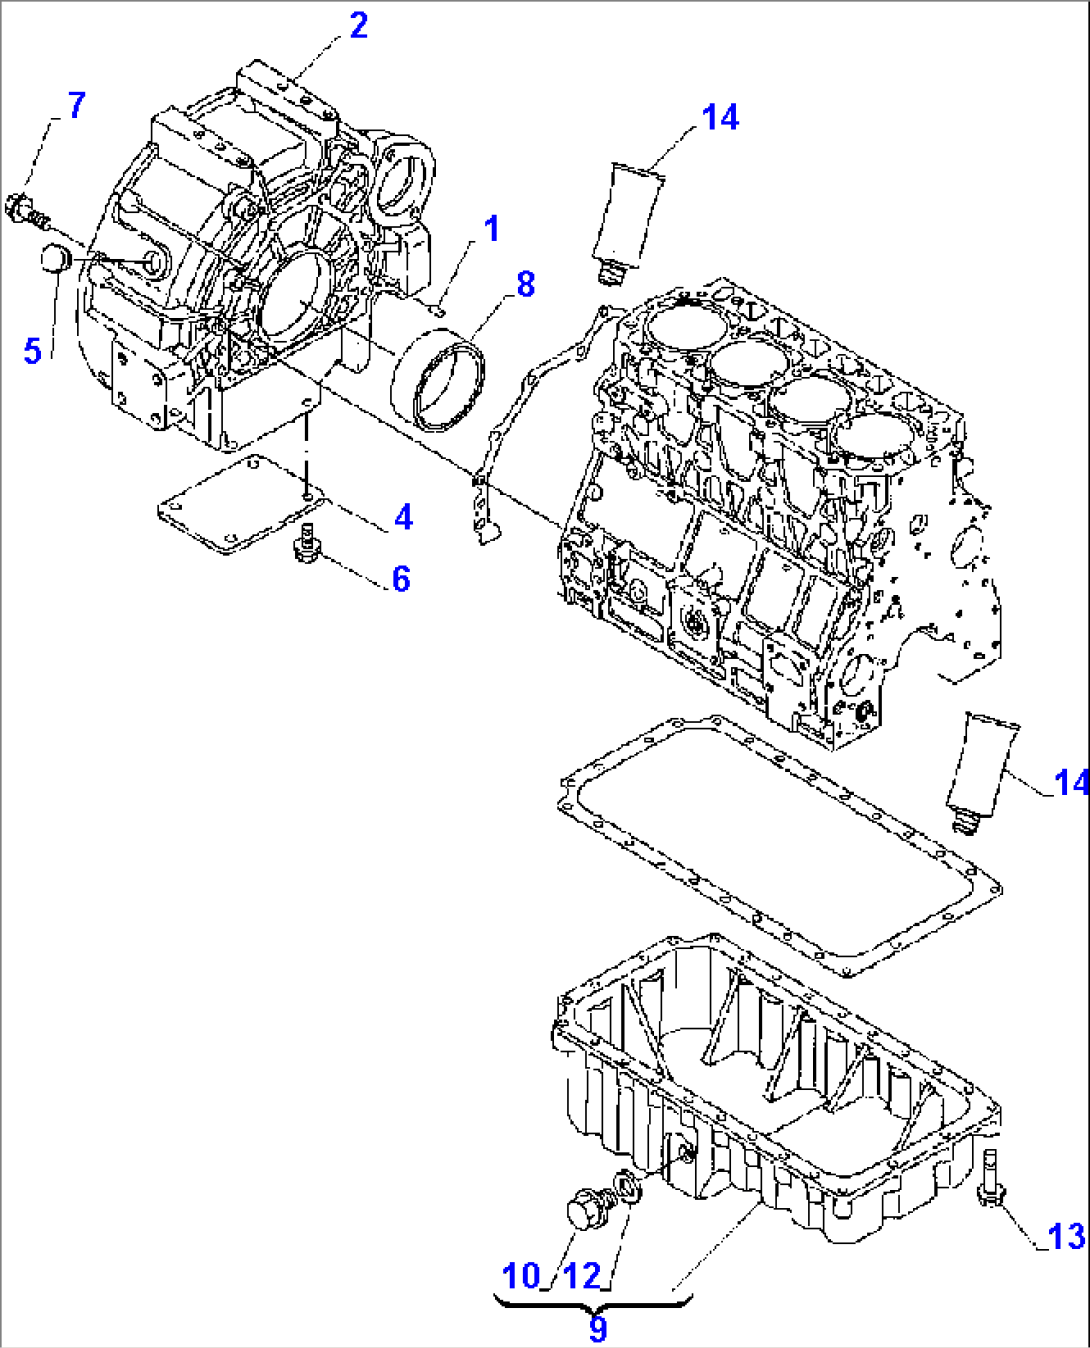 FIG. A0221-03A0 FLYWHEEL HOUSING AND OIL SUMP